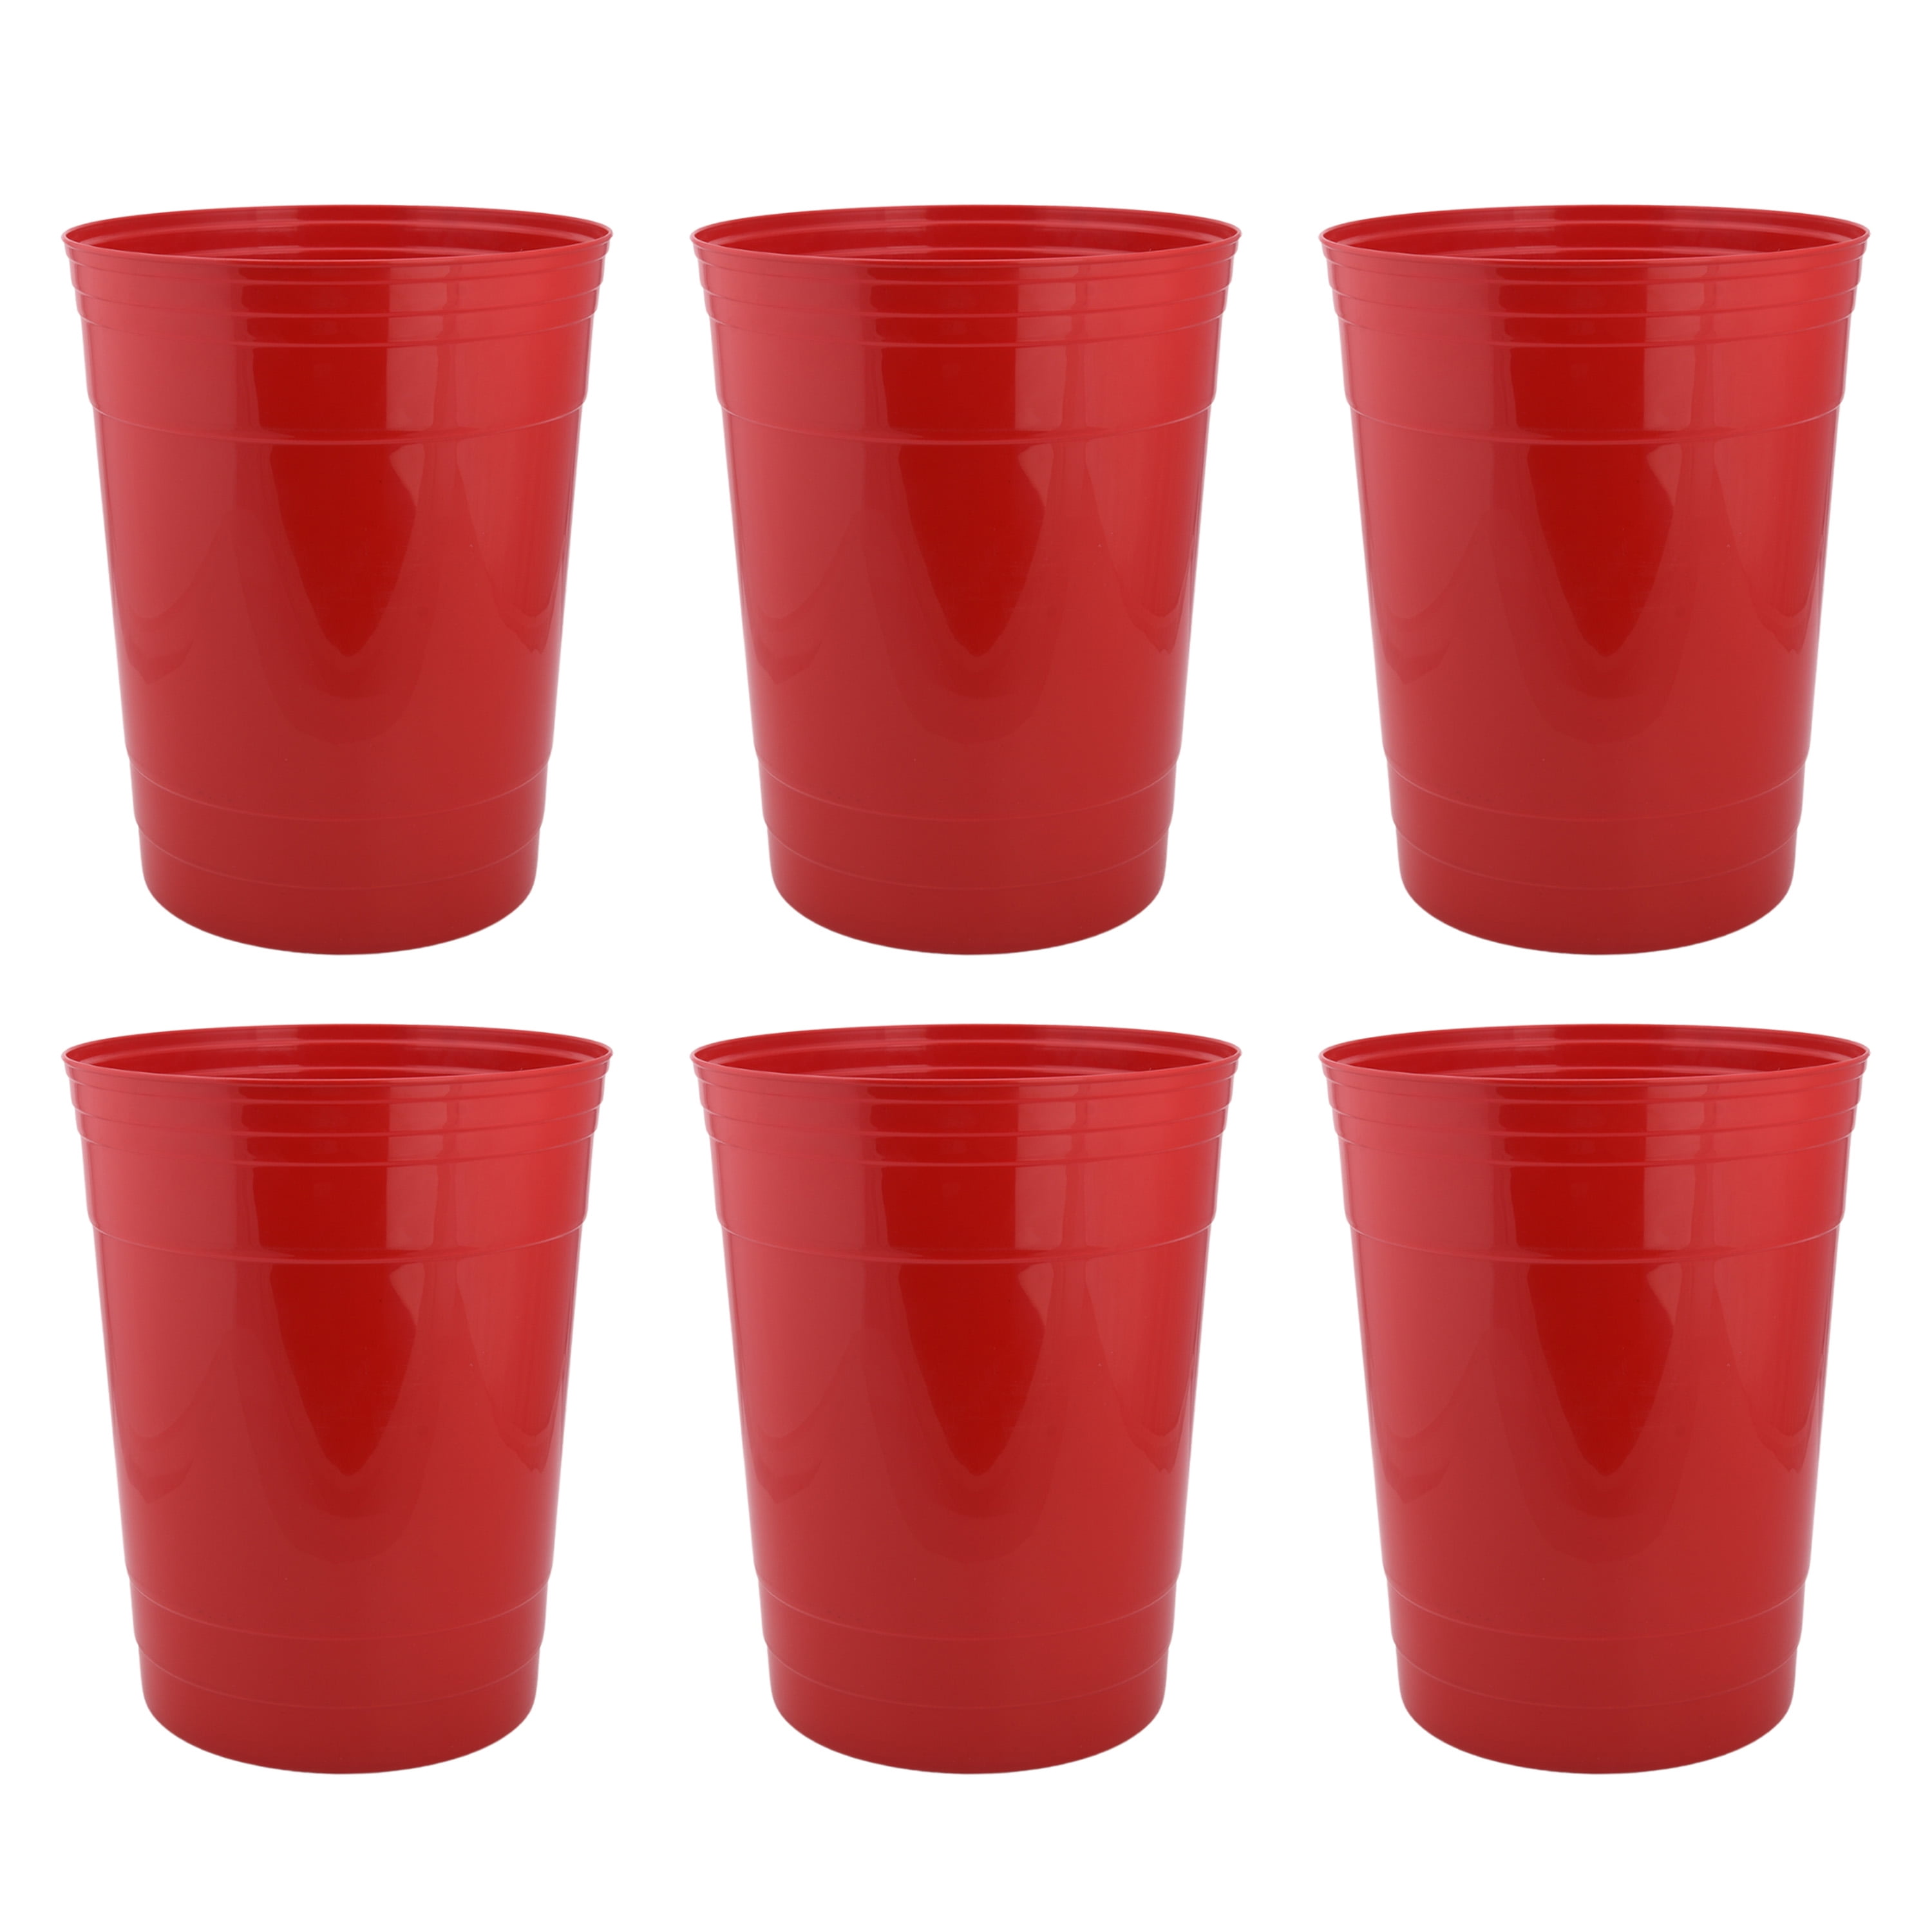 6-Count Red Cup 3-Gallon Plastic Trash Can $4.56 ($0.76 Each) + Free Shipping w/ Walmart+ or $35+